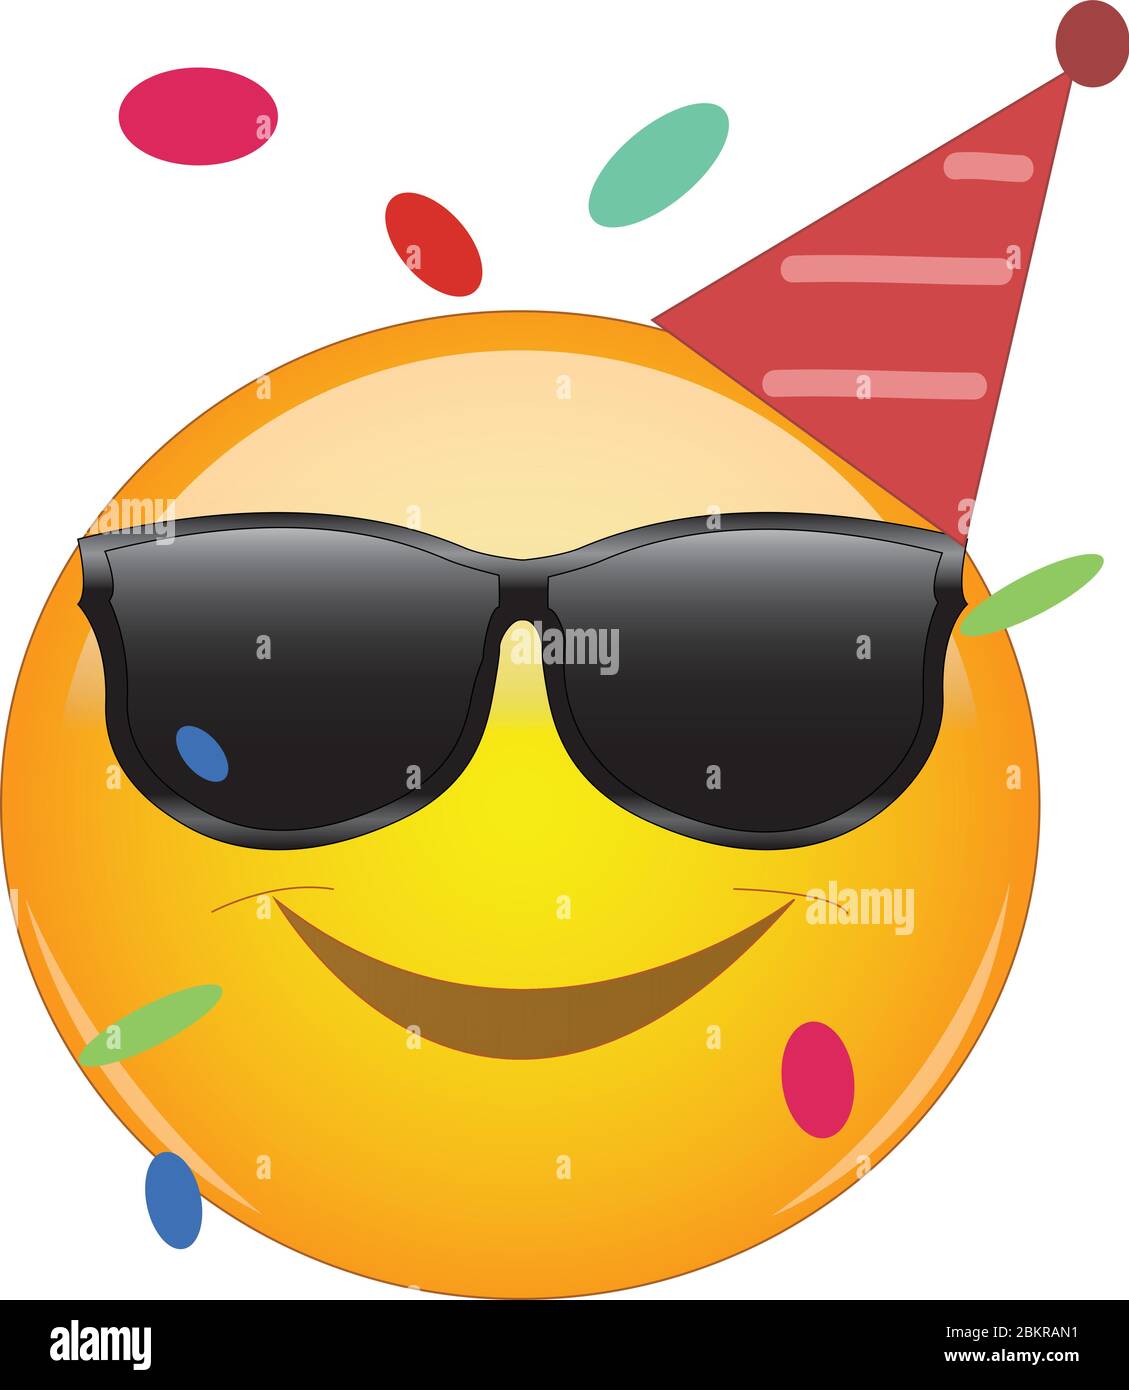 Cool emoji wearing a party hut, sunglasses and confetti flying around. Party emoticon with round yellow face and smiling. Expression of fun, good time Stock Vector